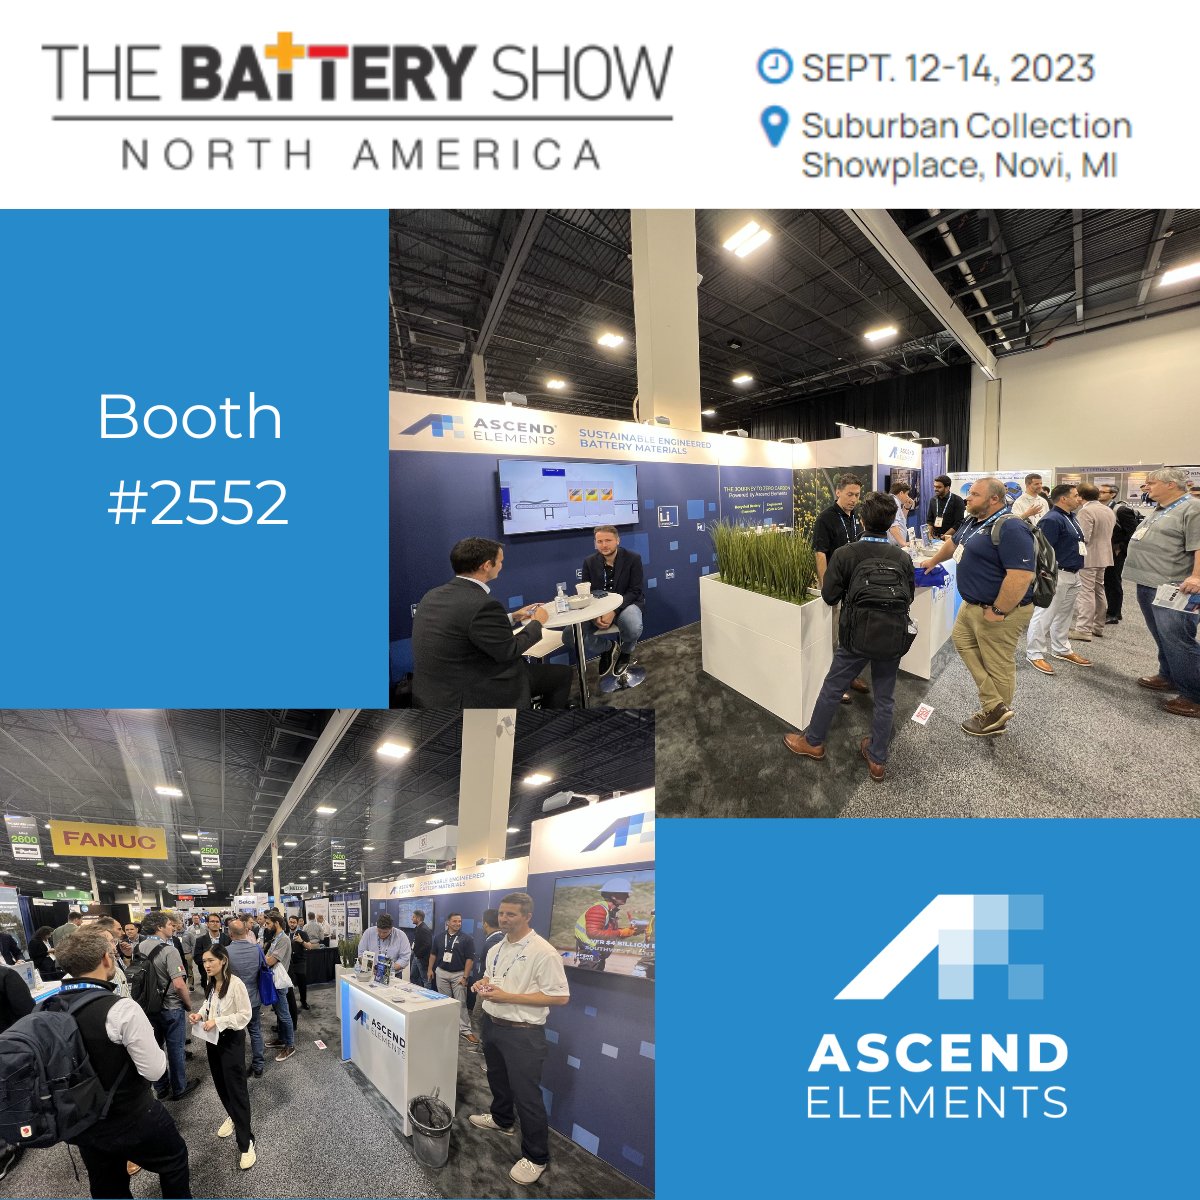 Huge crowds at @thebatteryshow this week. Stop by Booth # 2552 to meet the Ascend Elements team and learn how we are accelerating the journey to #zerocarbon #emissions with sustainable cathode materials.